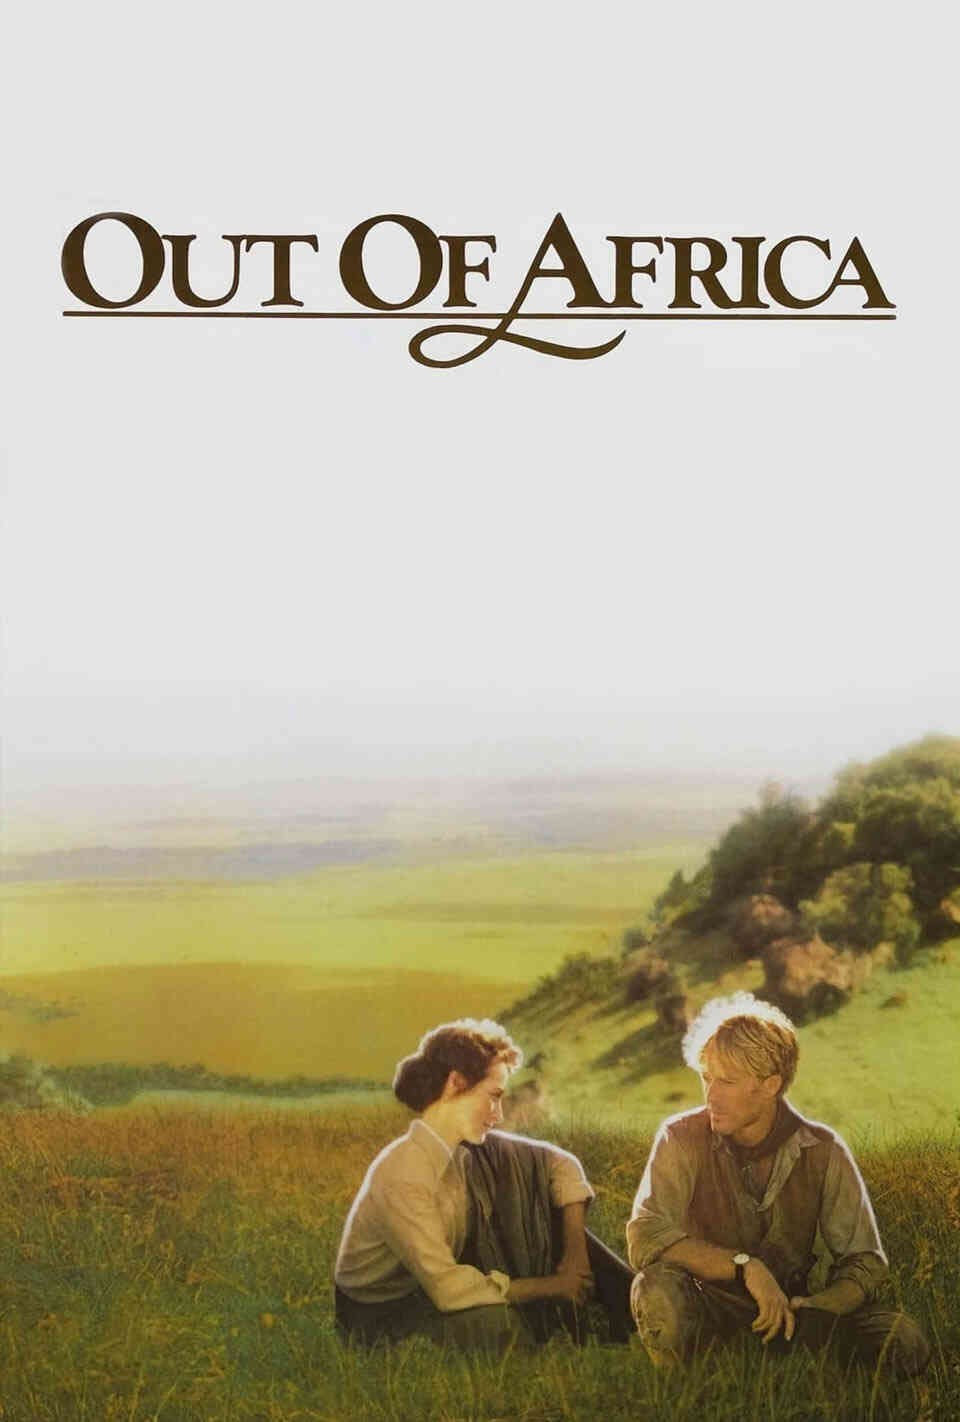 Read Out of Africa screenplay (poster)